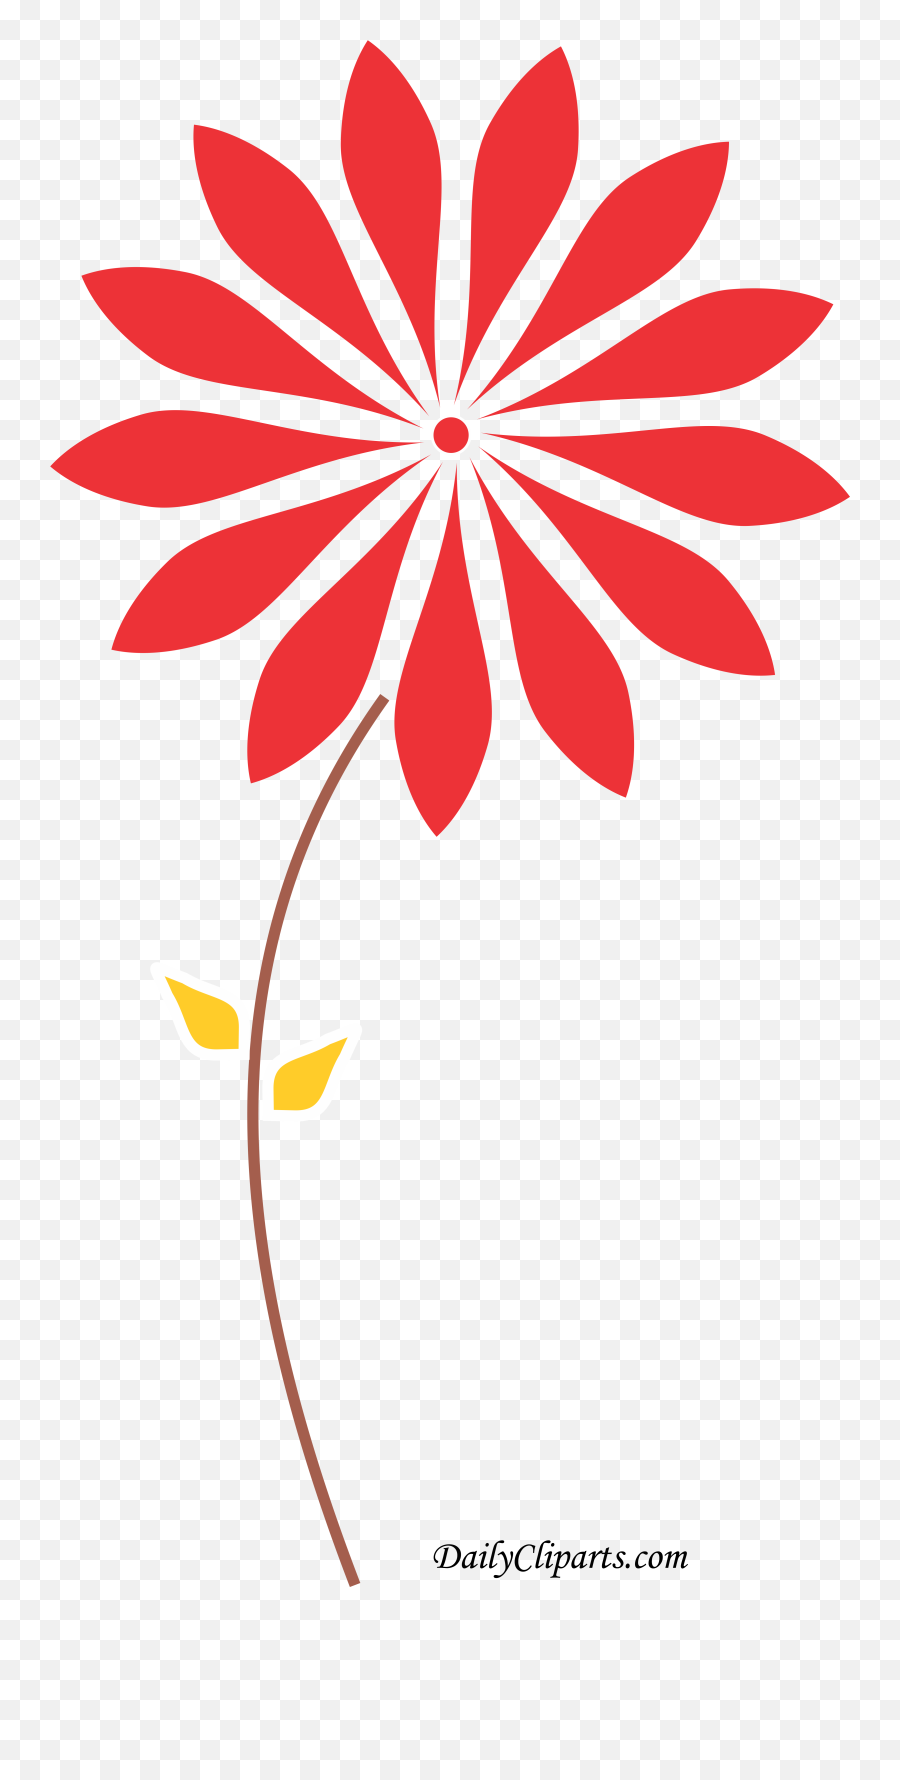 Red Flower Yellow Leaves Brown Stem Clipart Icon Daily - Daisy Flower Cut Out Png,Flower Graphic Png